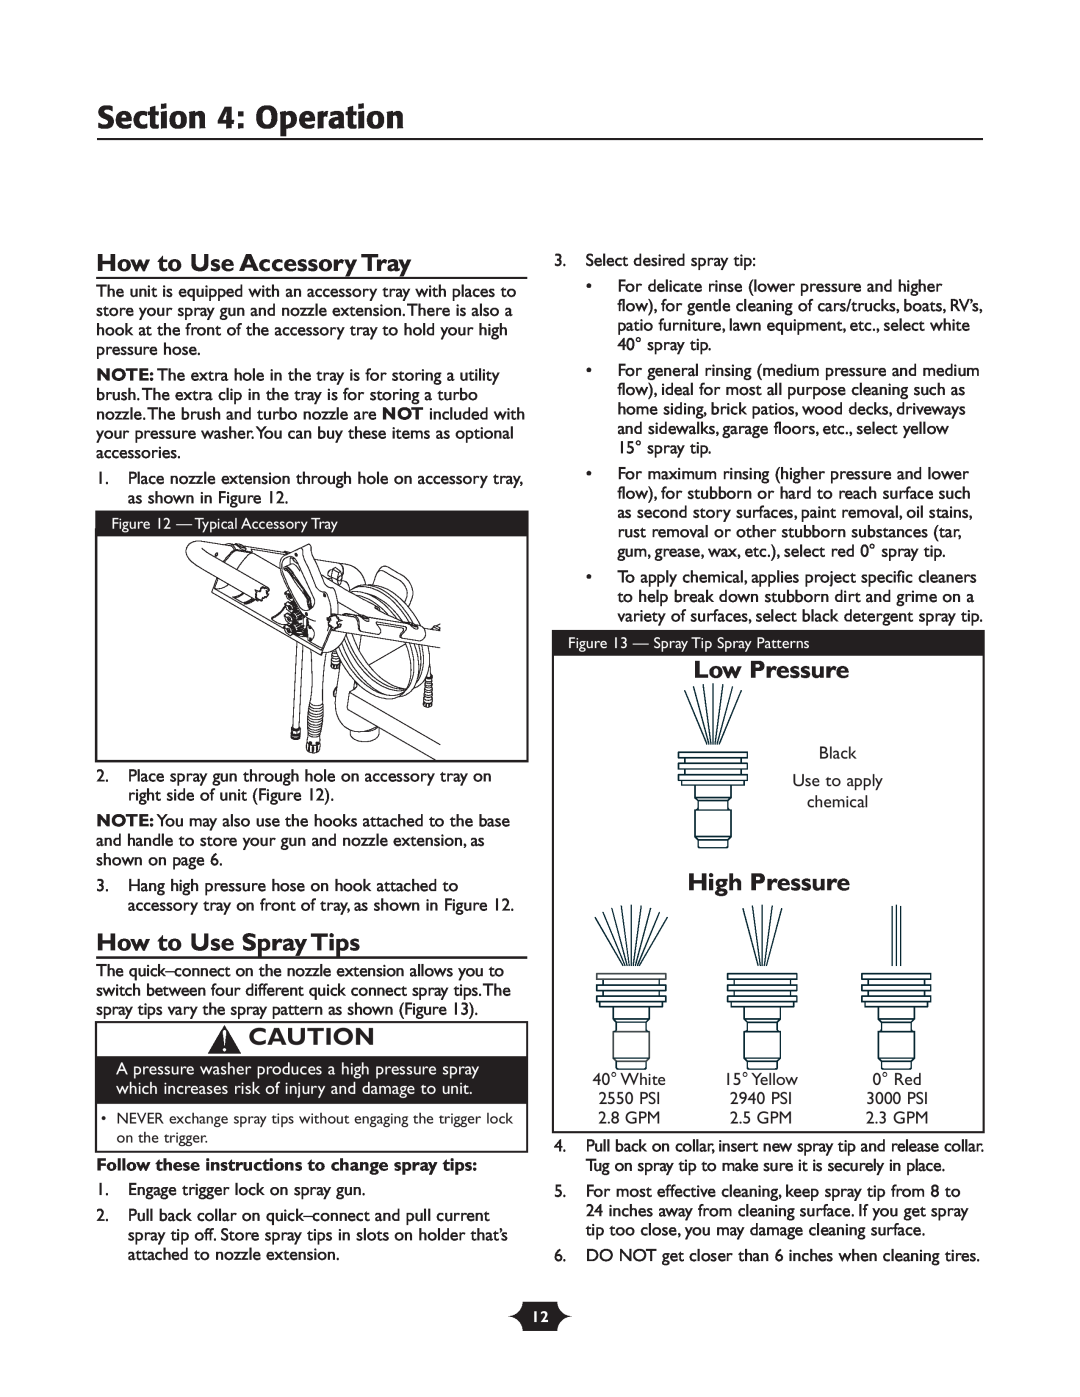 Troy-Bilt 020242-4 manual How to Use Accessory Tray, How to Use Spray Tips, Low Pressure, High Pressure, Operation 